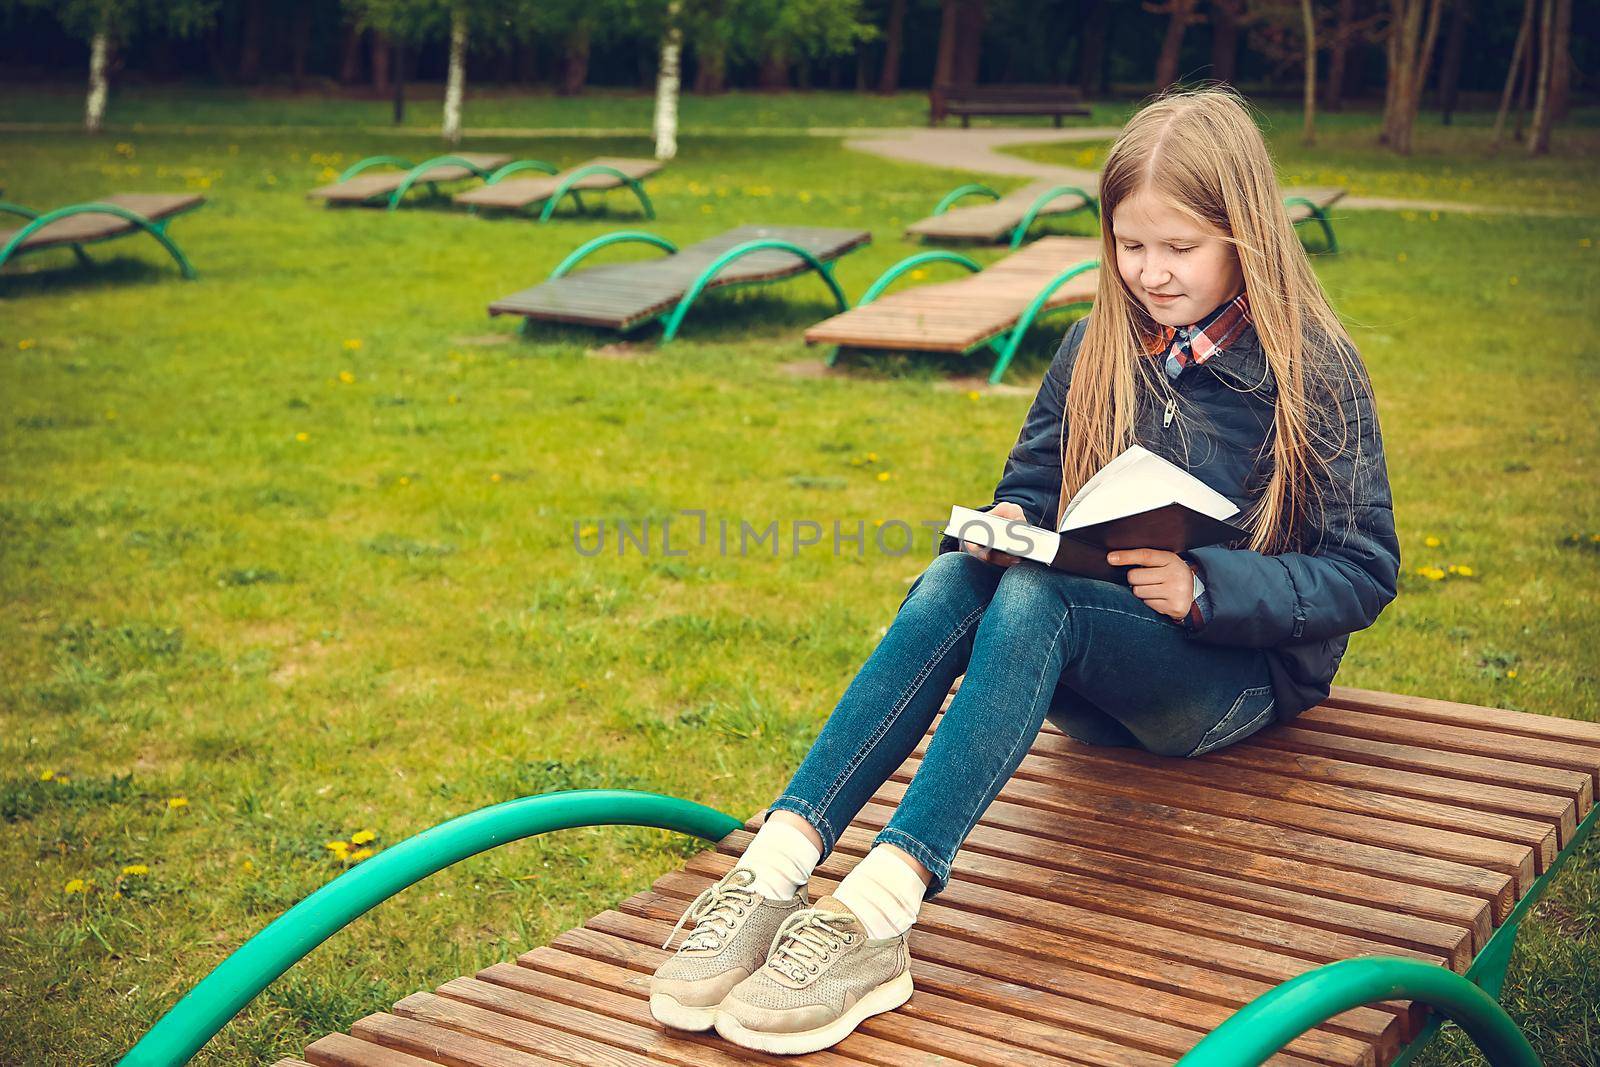 School girl with blond hair sitting on a wooden bench in a forested area and reading a book